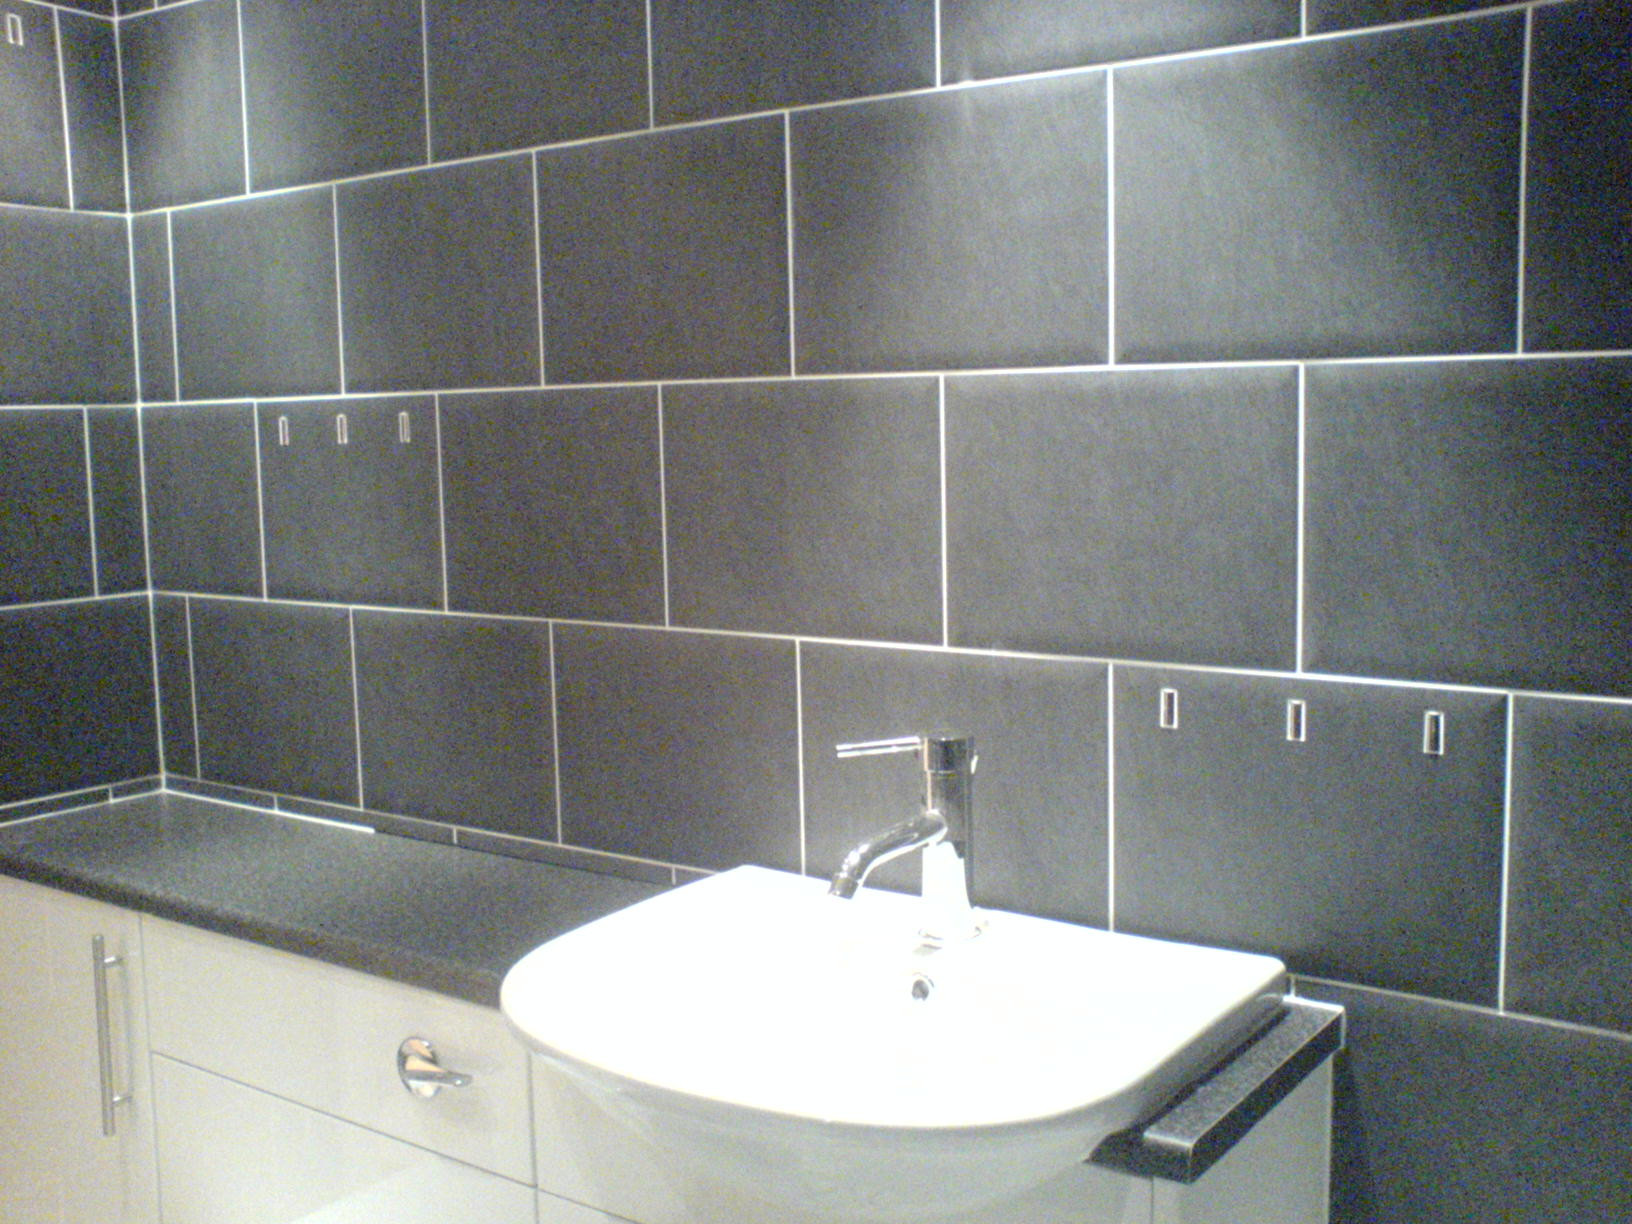 Tile Sheets For Bathroom Walls
 30 cool pictures and ideas of plastic tiles for bathroom